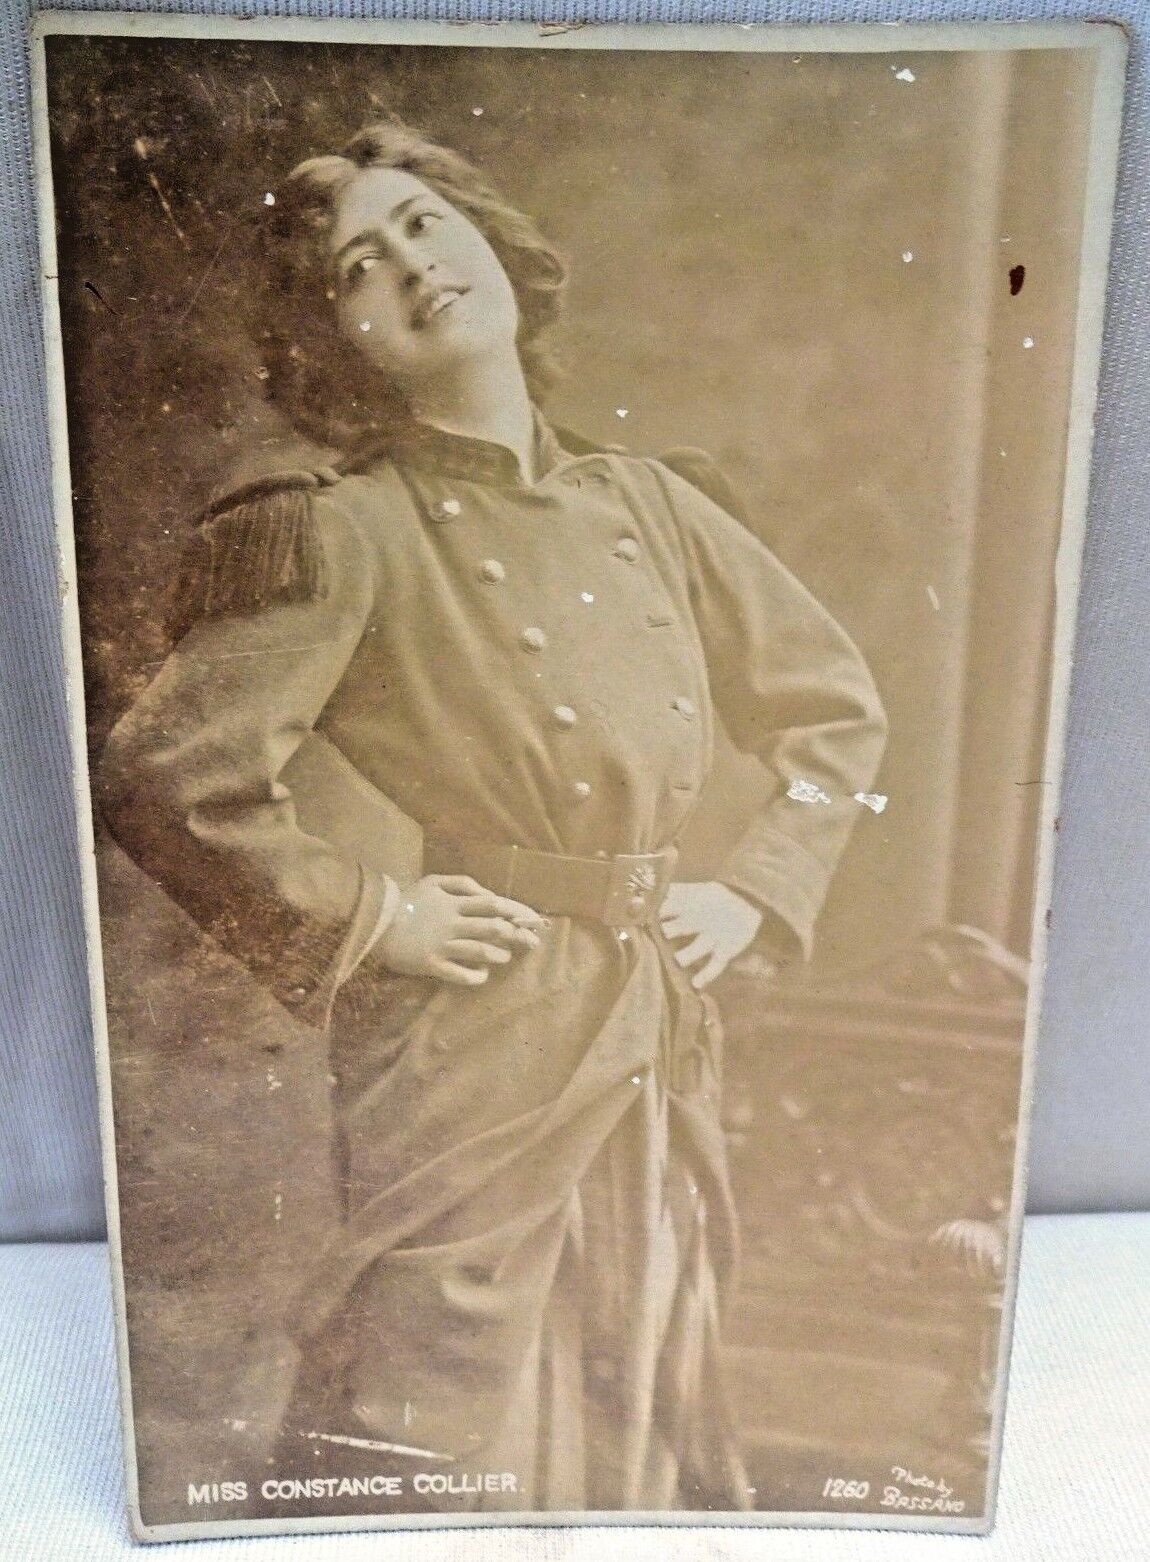 MISS CONSTANCE COLLIER BASSANO POST CARD PHOTO VINTAGE PHOTOGRAPH COLLECTIBLES 